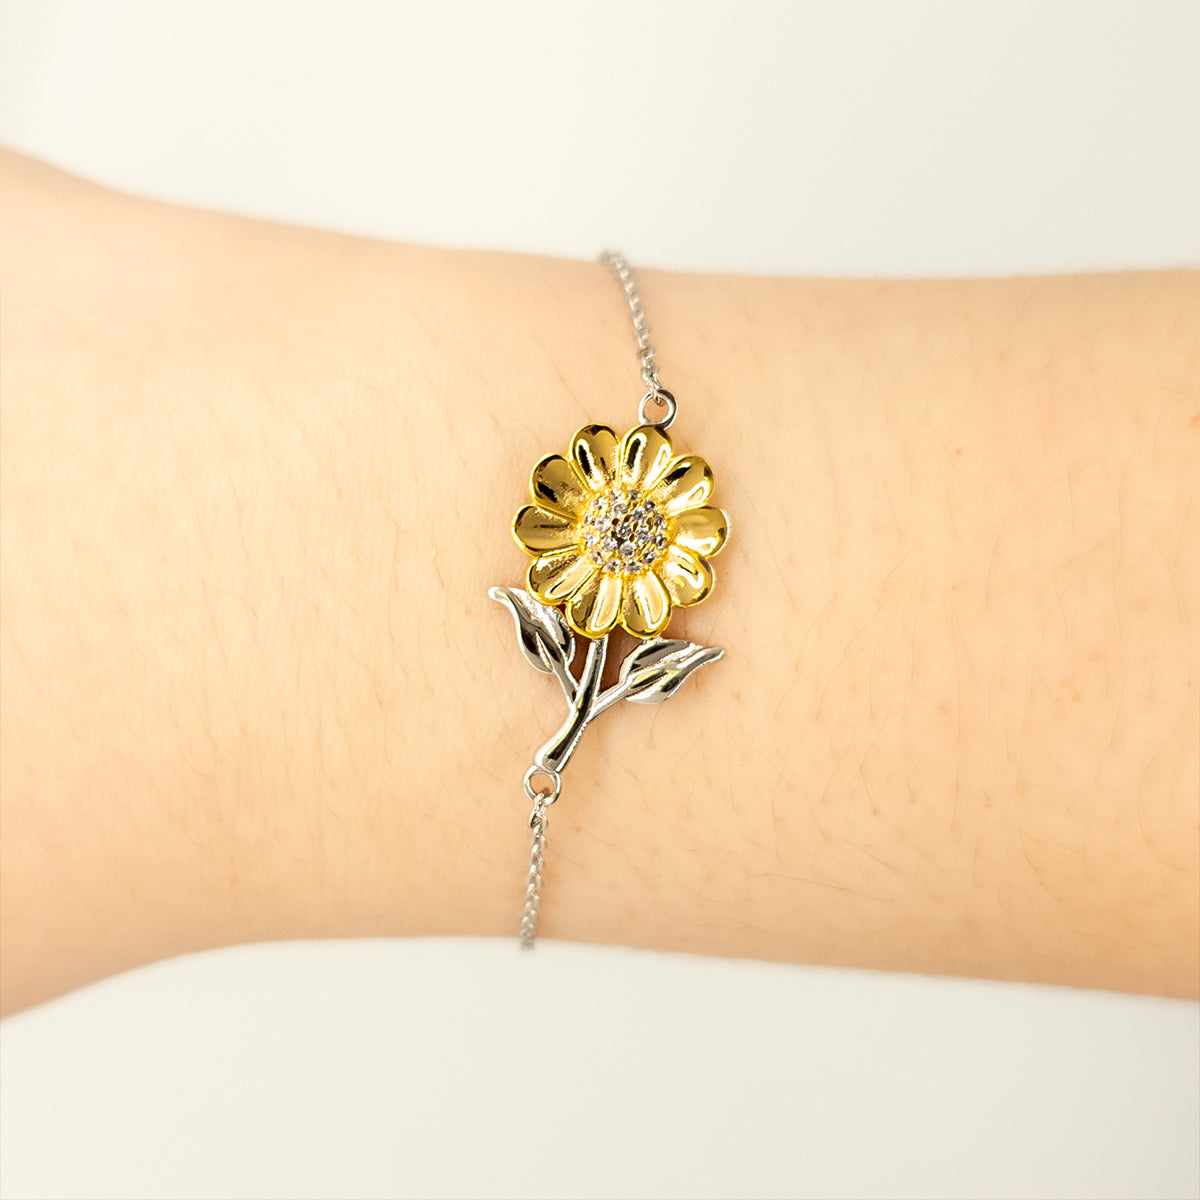 Gramps Sunflower Bracelet - Engraved with You will always have a special place in my heart - Heartfelt Gift for Grandpa on Birthday, Christmas, and Veterans Day - Unique Jewelry for Grandparents to show Love and Appreciation